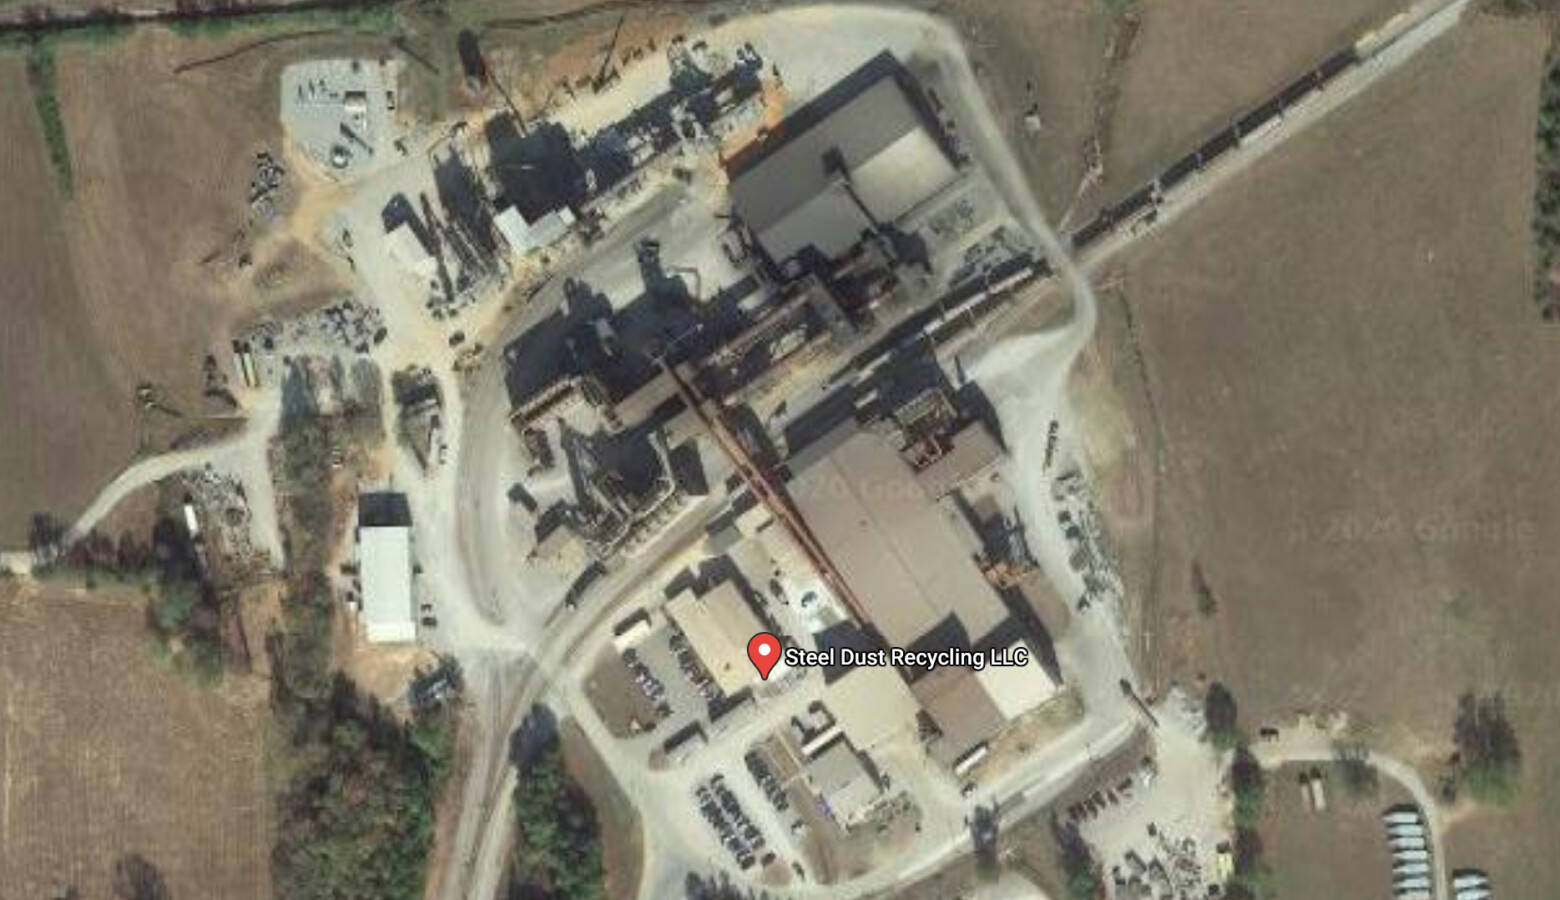 An aerial of a similar facility called Steel Dust Recycling in Millport, Alabama. (Courtesy of Google Maps)